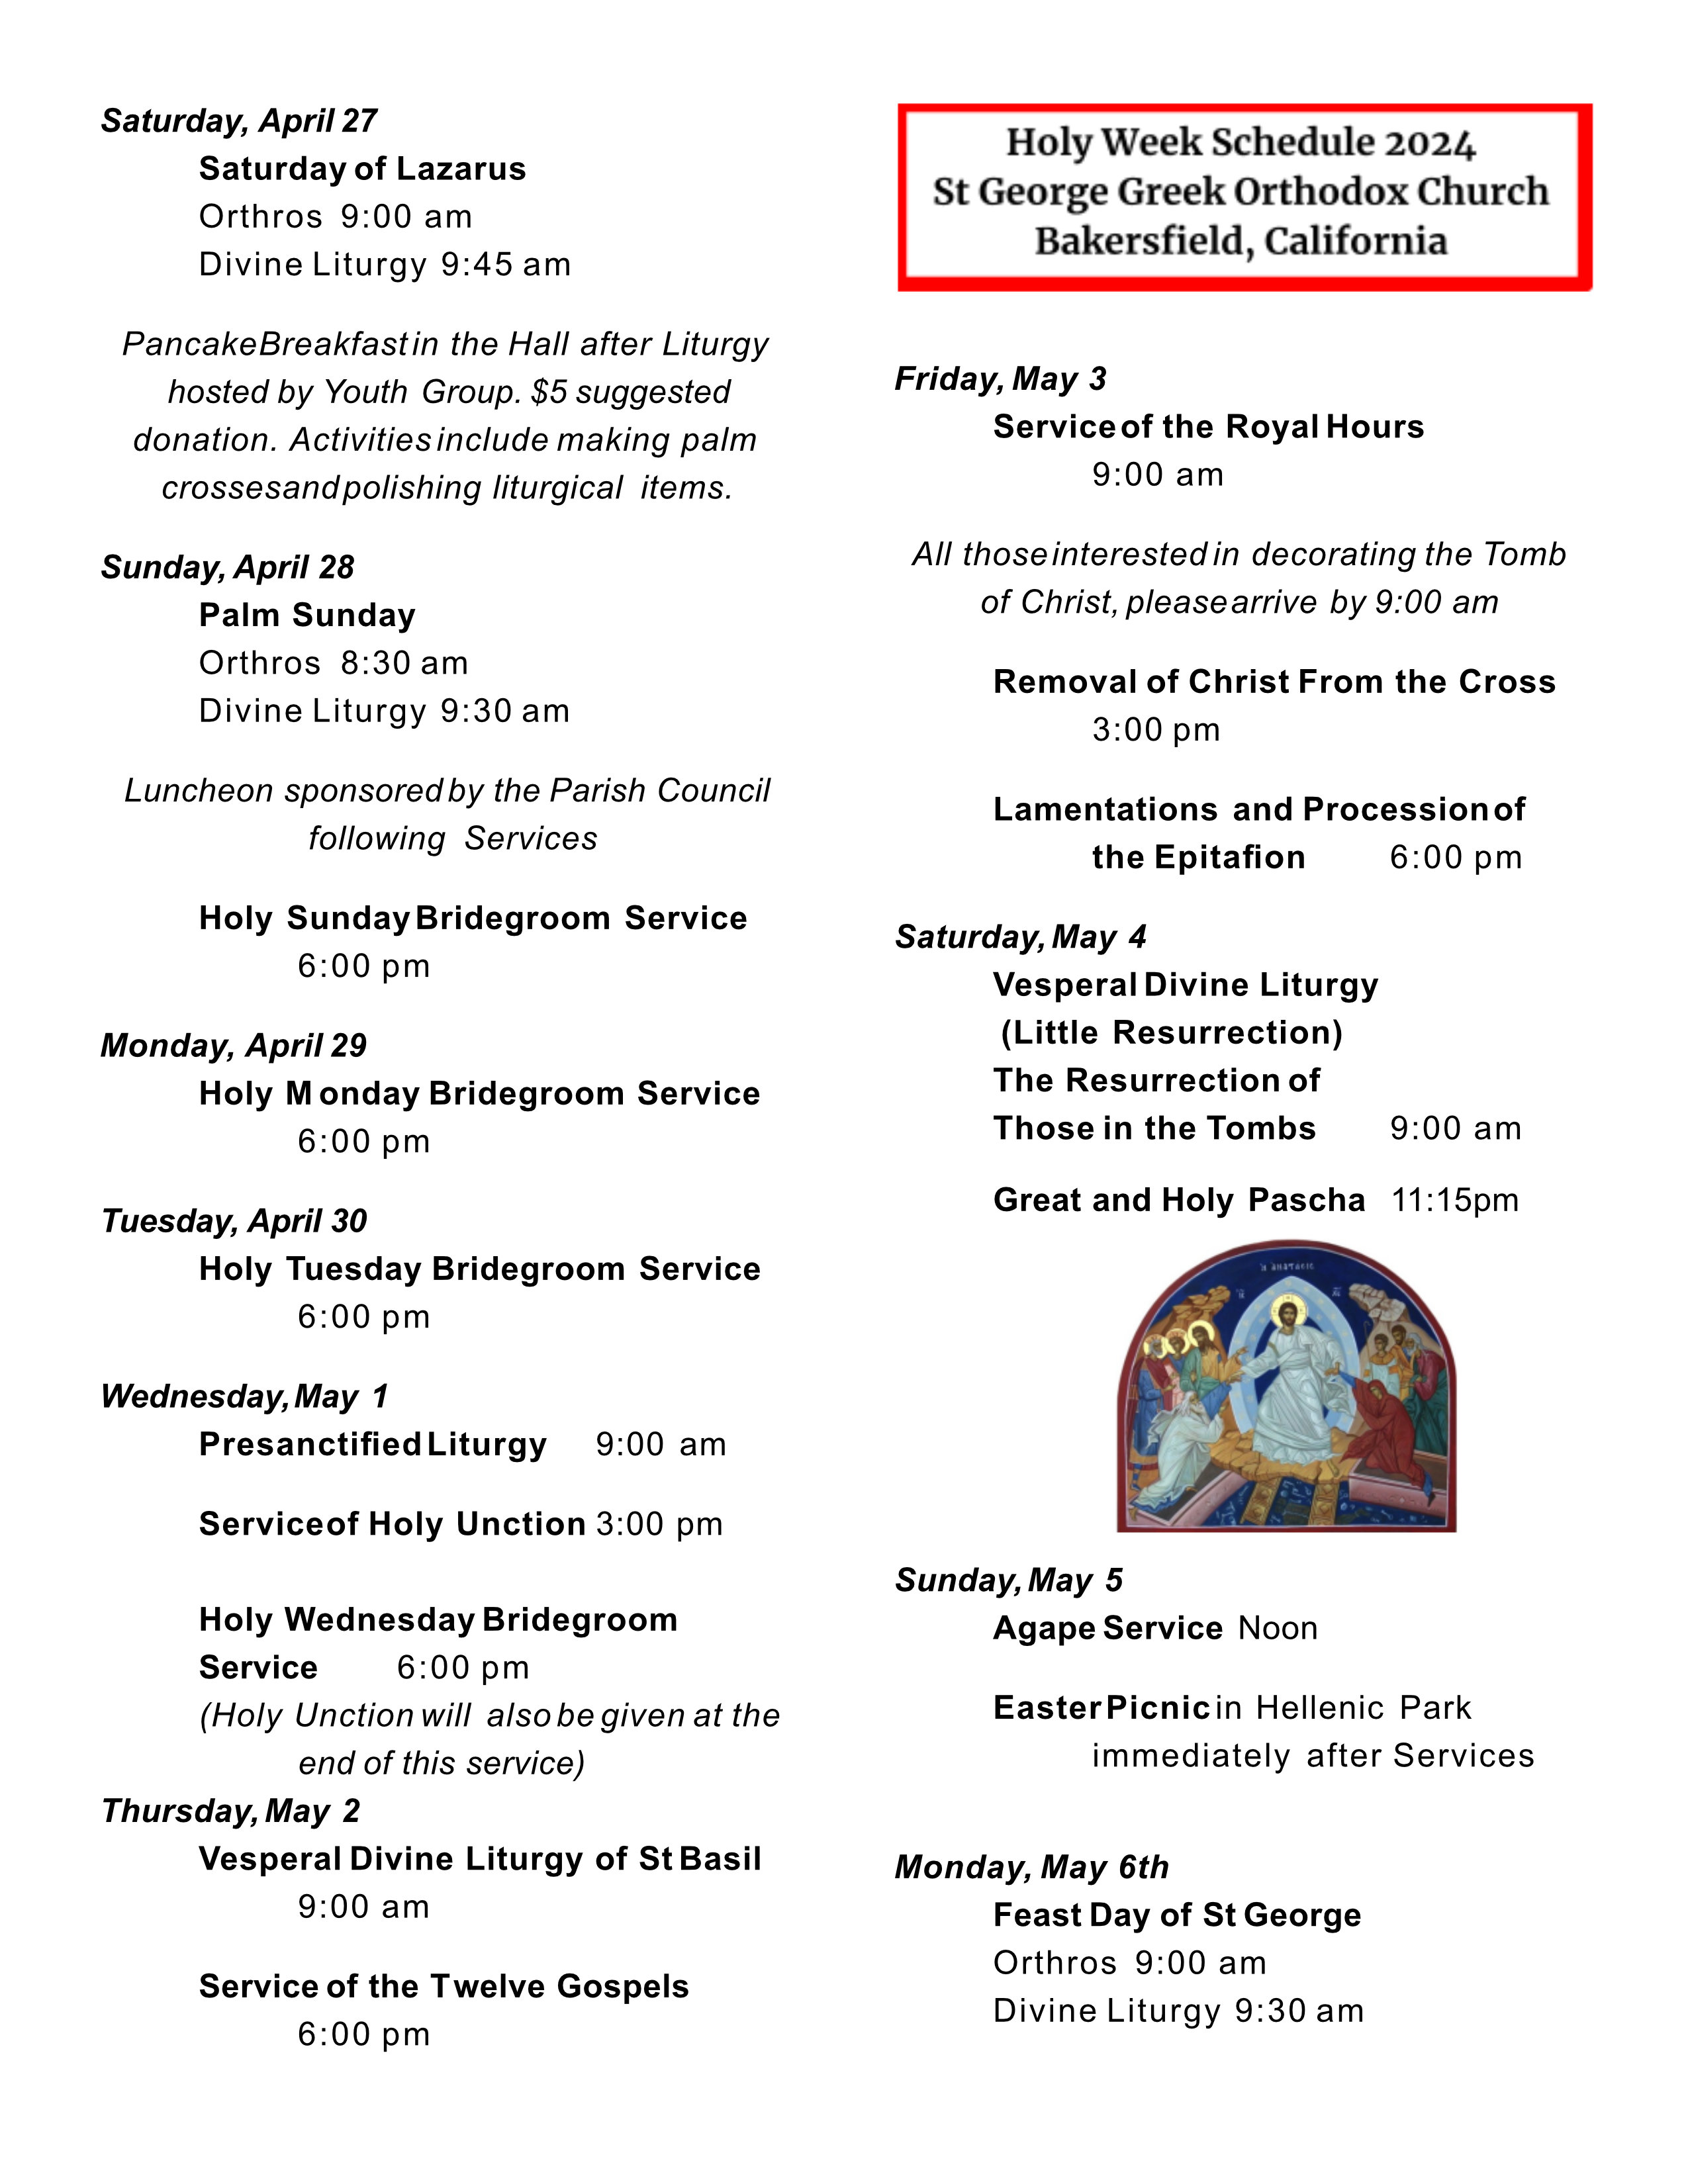 holy week services schedule